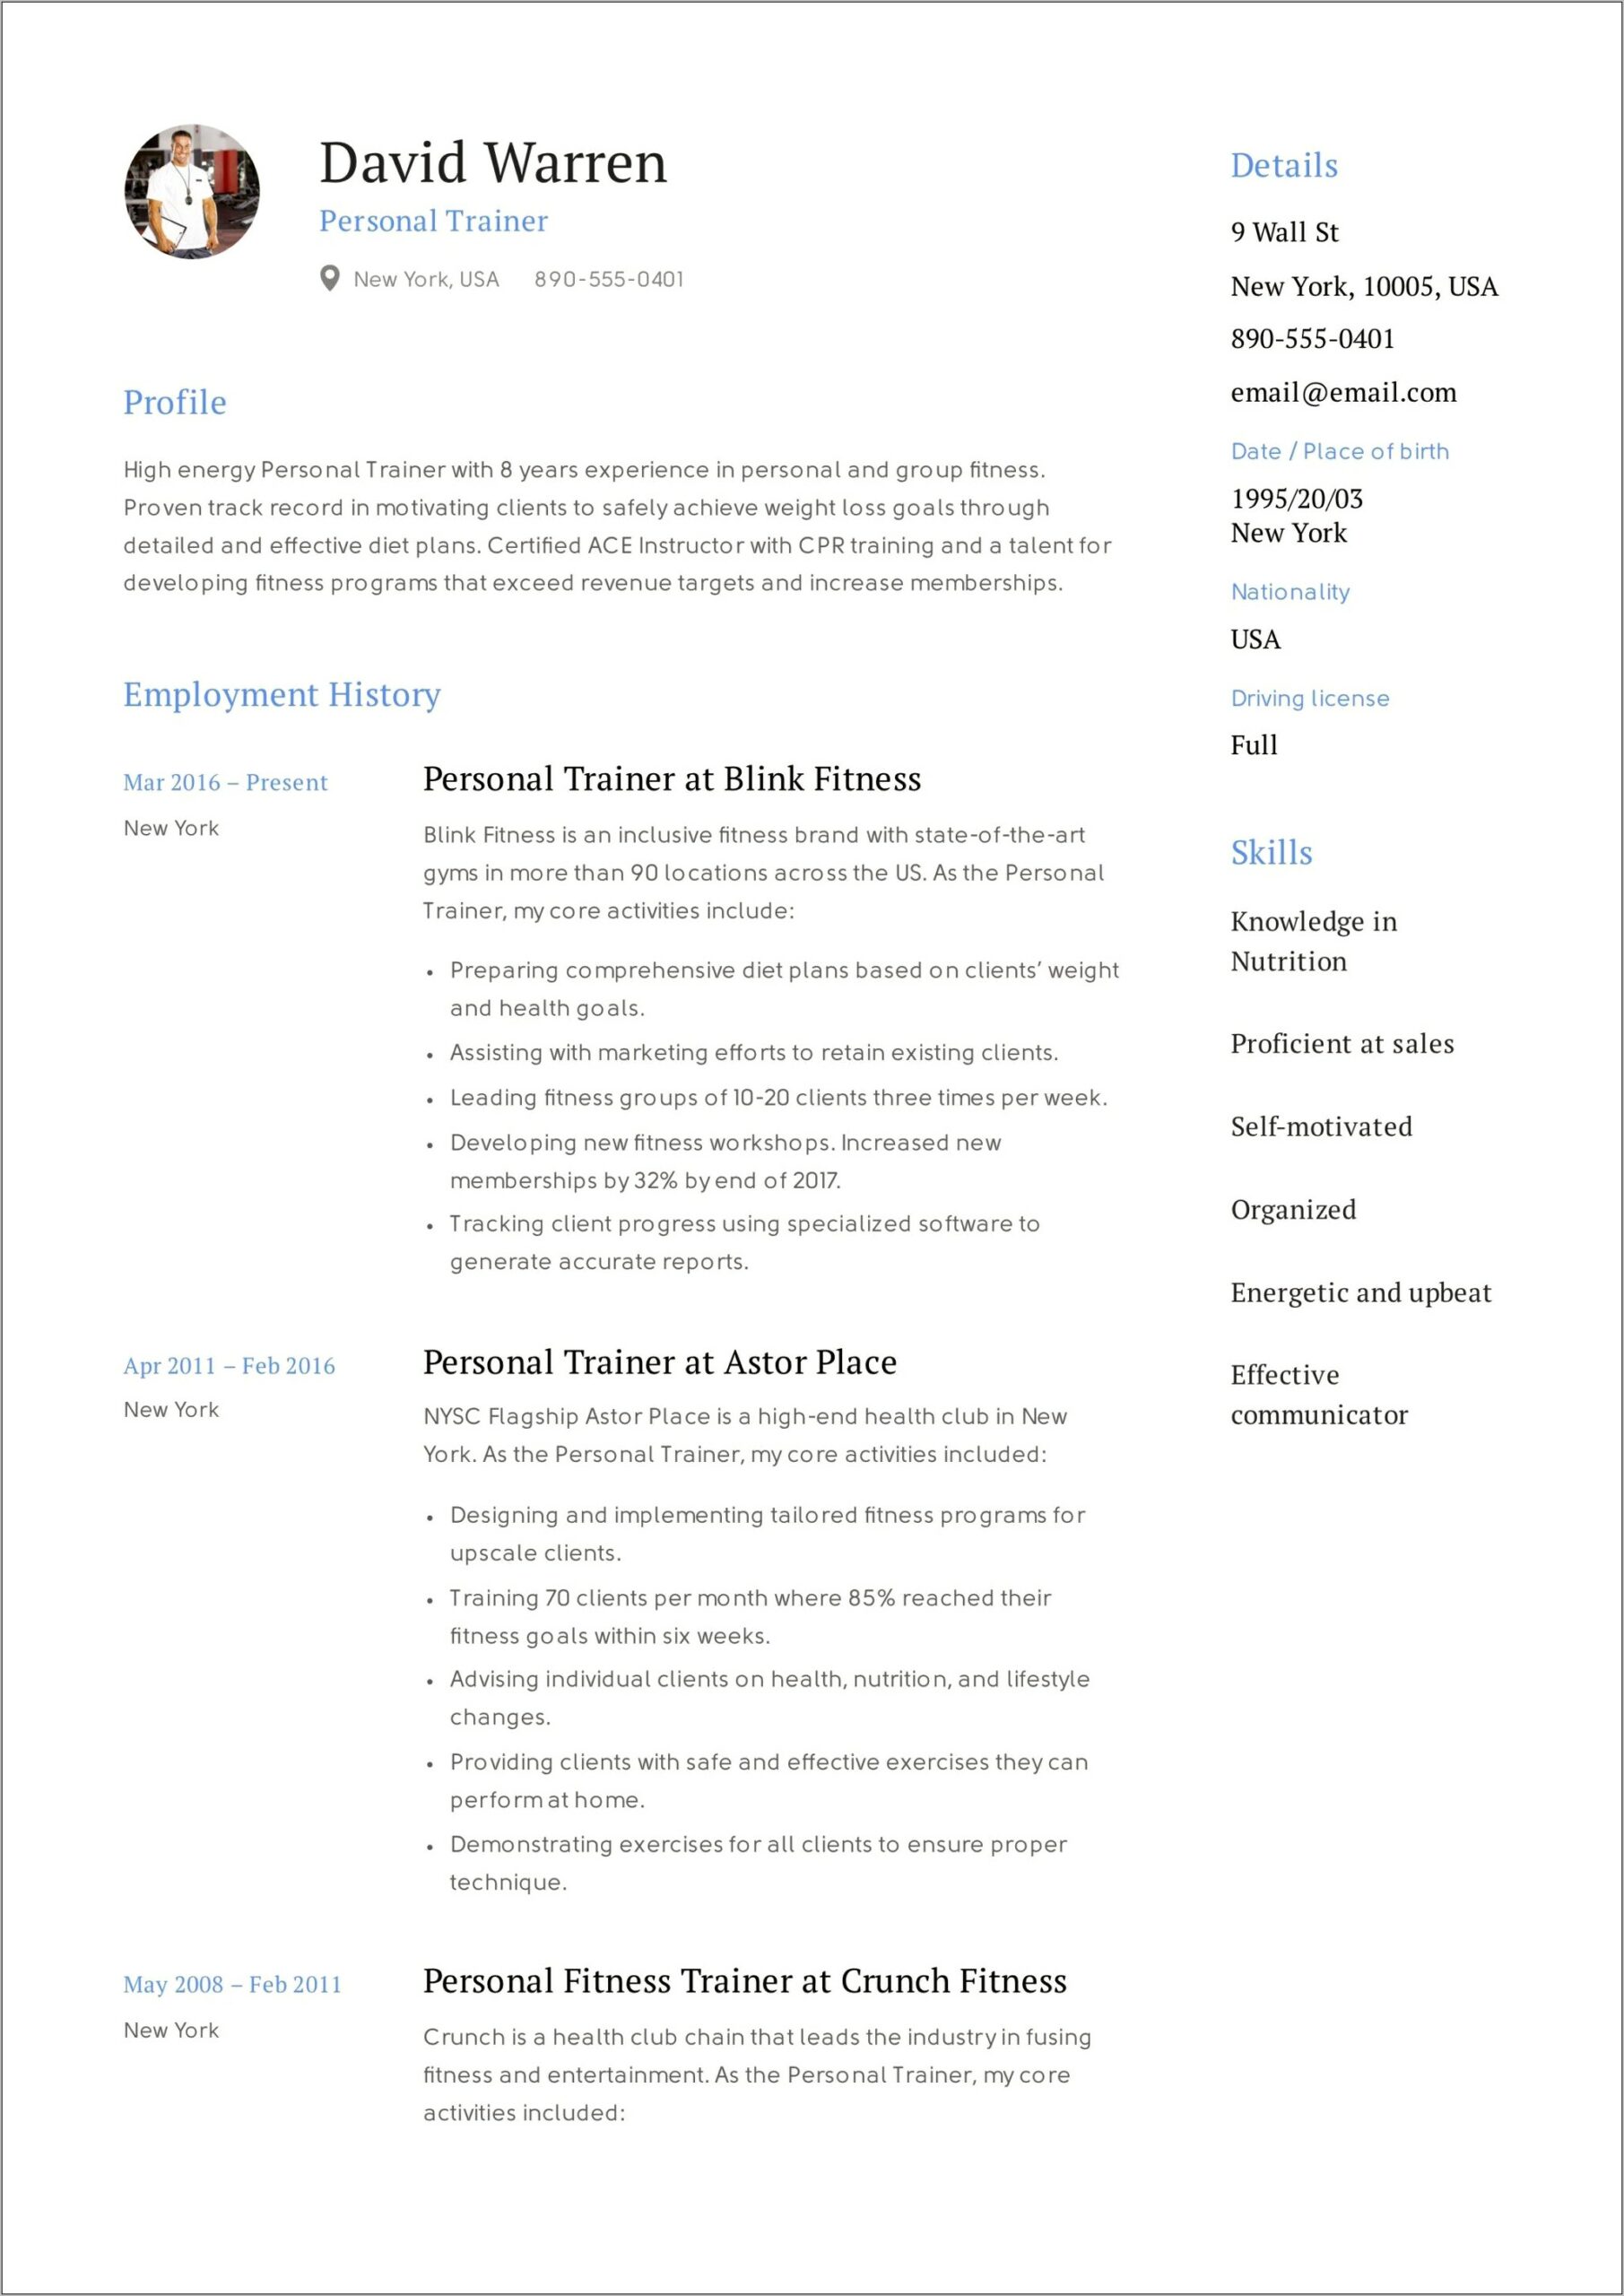 Resume Samples For Personal Trainers